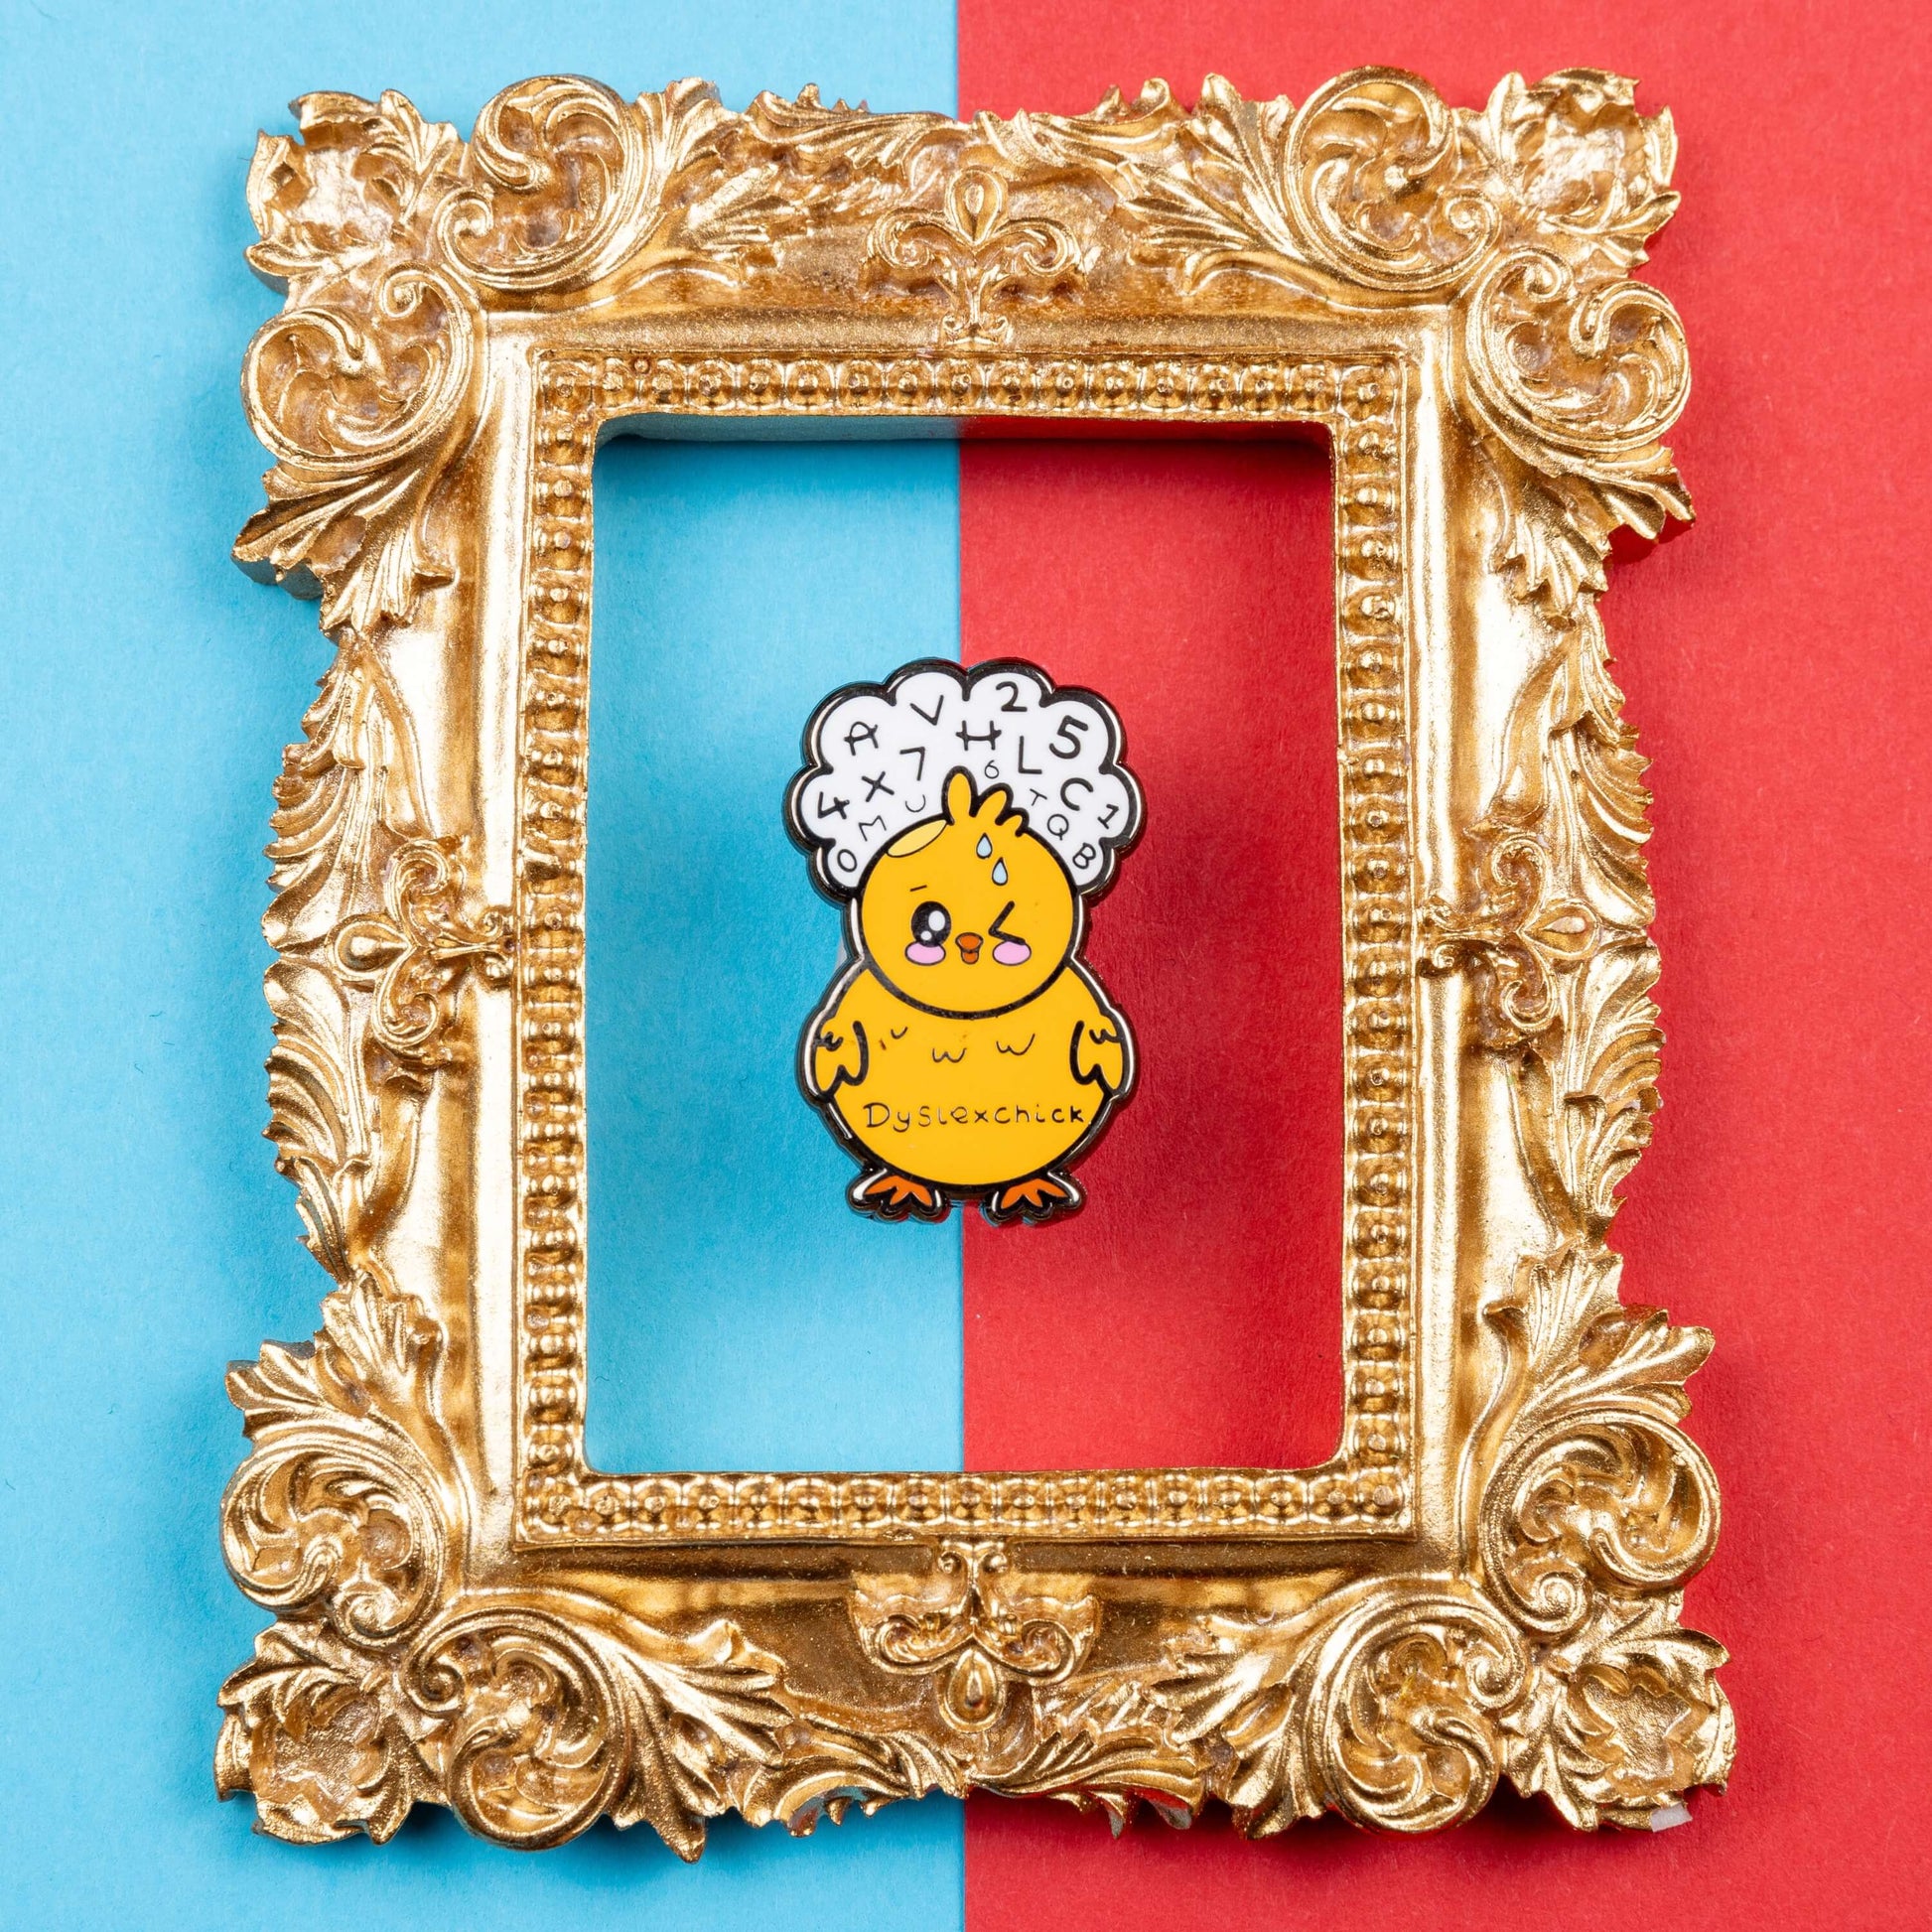 The Dyslexchick Enamel Pin - Dyslexia on a red and blue background inside a gold ornate frame. A yellow confused chick shaped pin badge with a thought bubble above its head full of letters and numbers with 'dyslexchick' written across its middle. The hand drawn design is raising awareness for dyslexia.